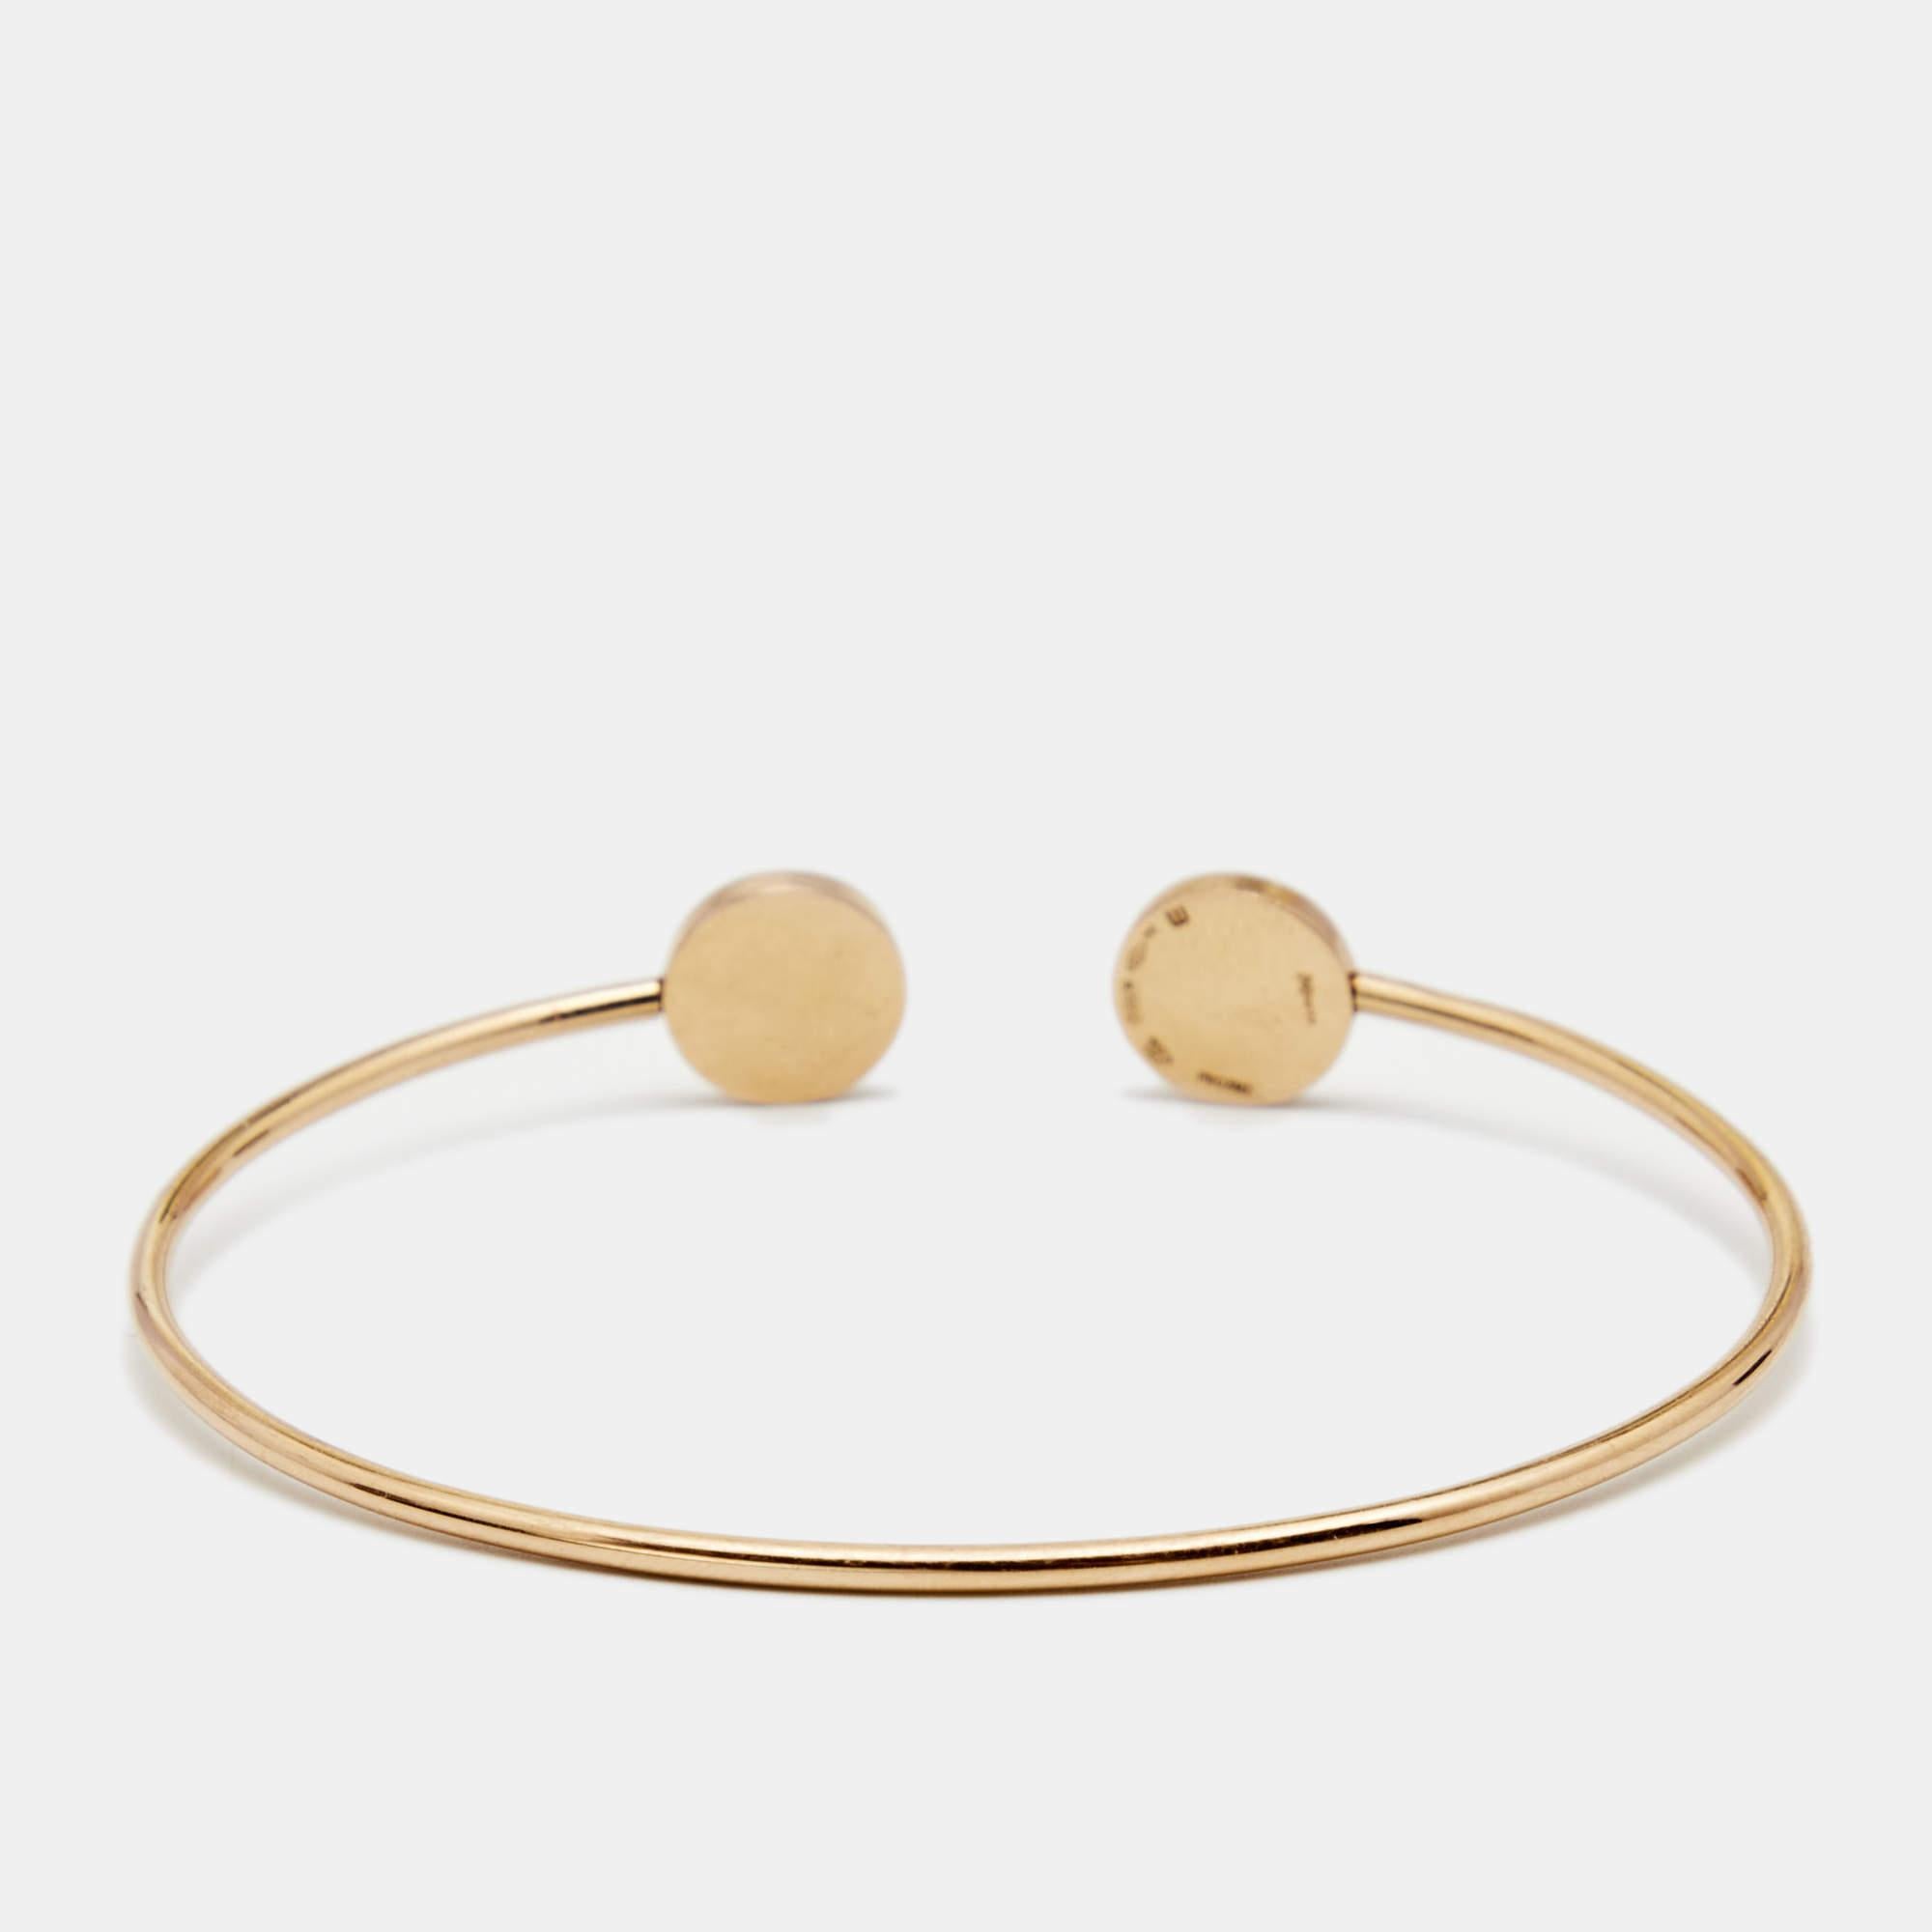 Elevate your look instantly with this Bvlgari bracelet. Crafted from 18k rose gold in a simple bangle style with an open cuff design, this piece carries two circular ends inlaid with mother of pearl and sugilite . Easy to wear and versatile in use,